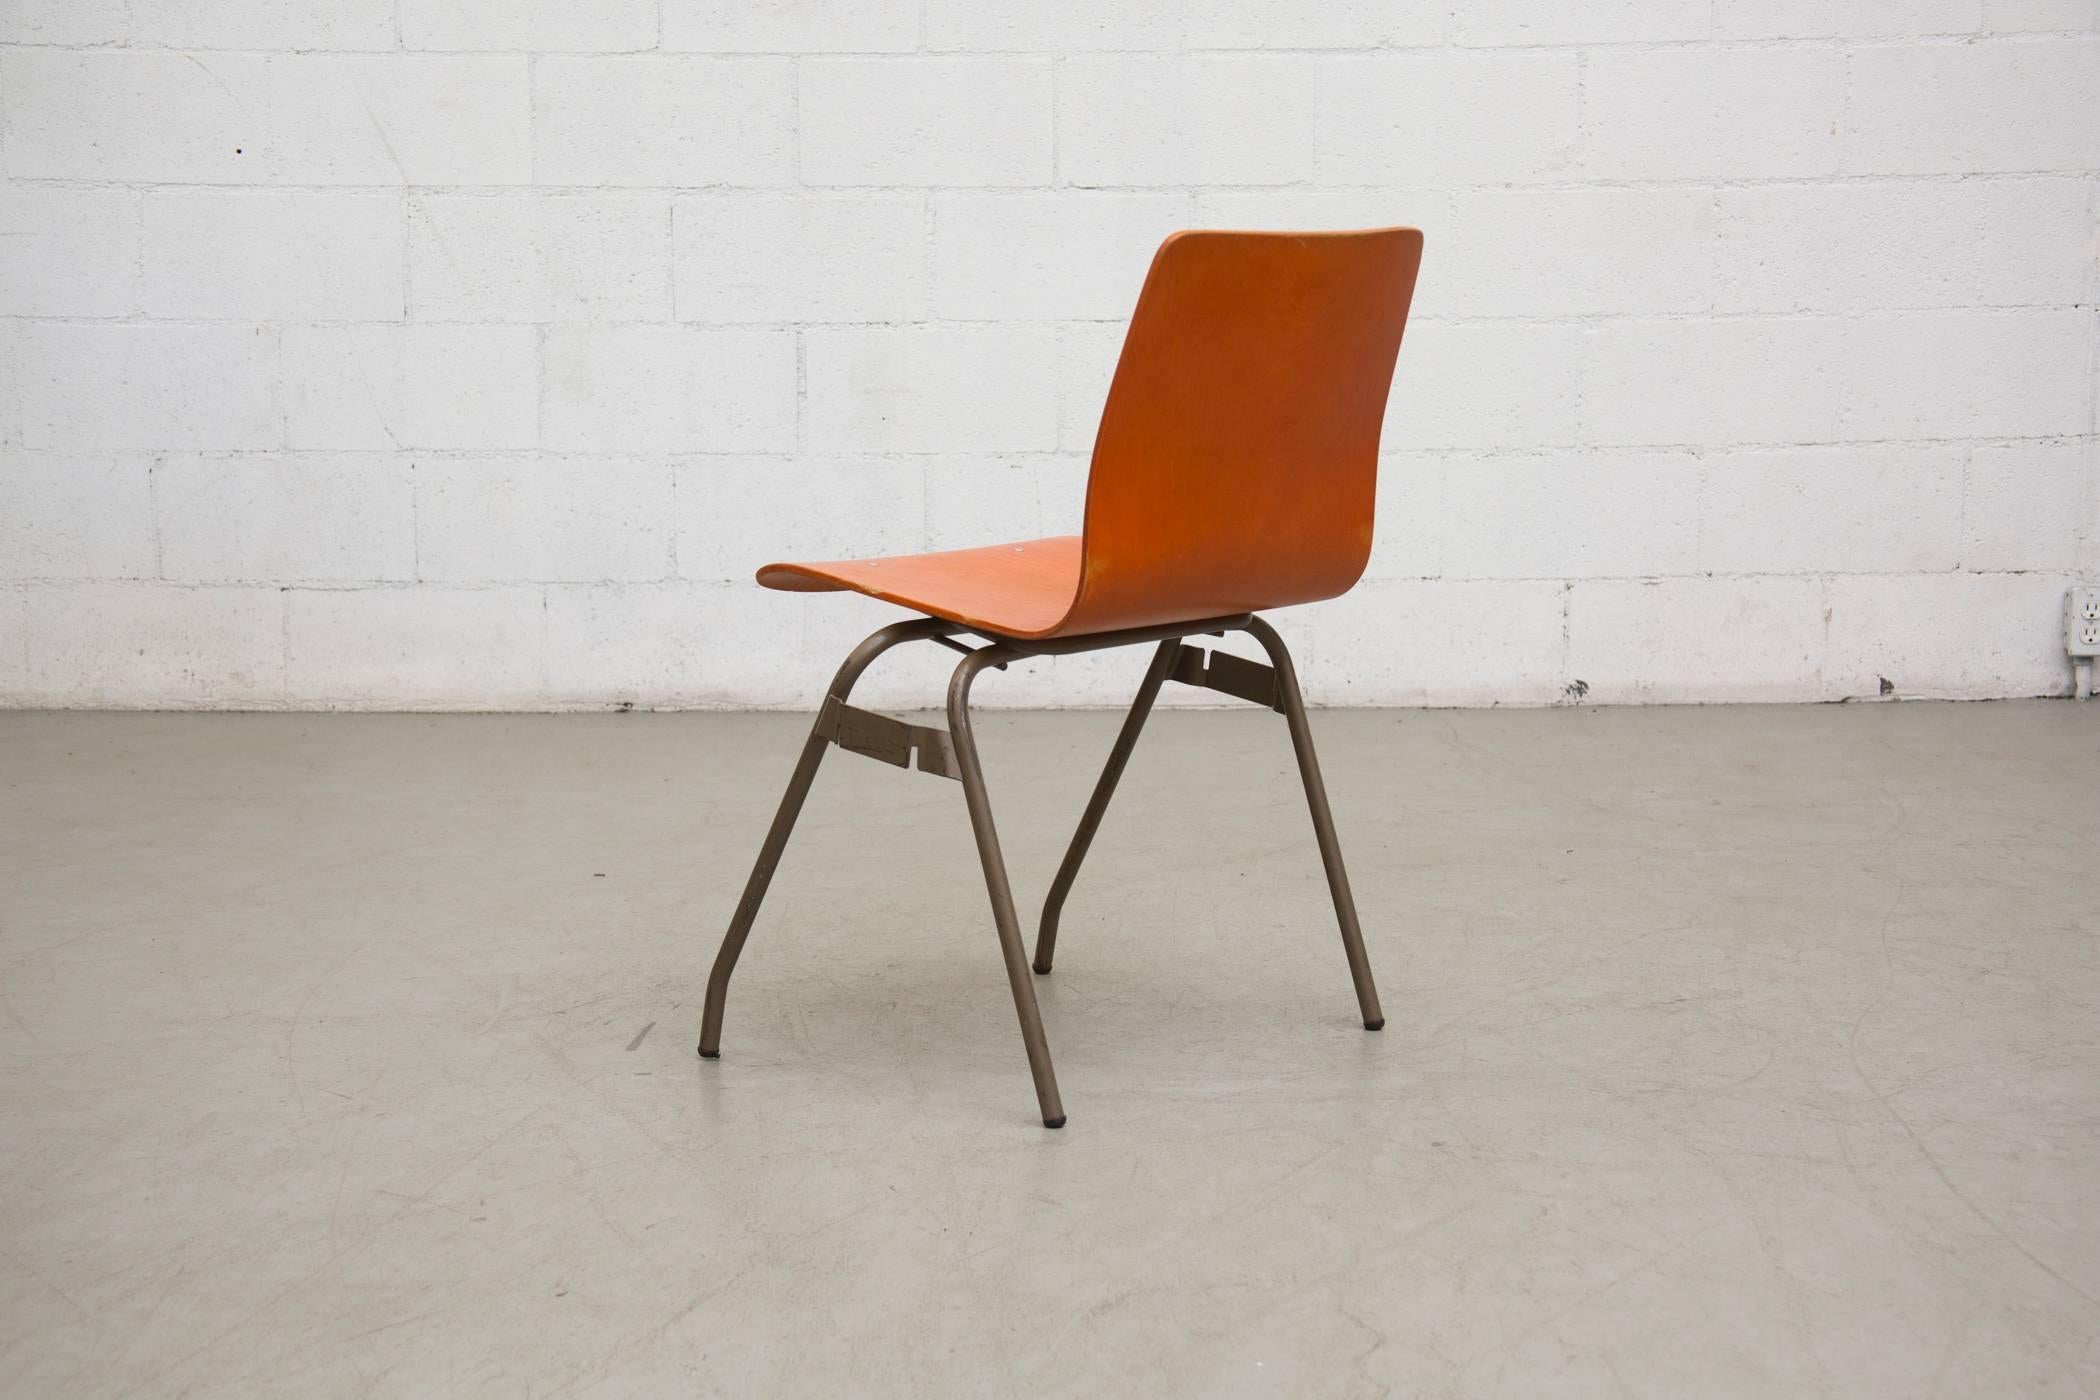 Enameled Kho Liang Le for Car Catwijk Industrial Stacking Chairs